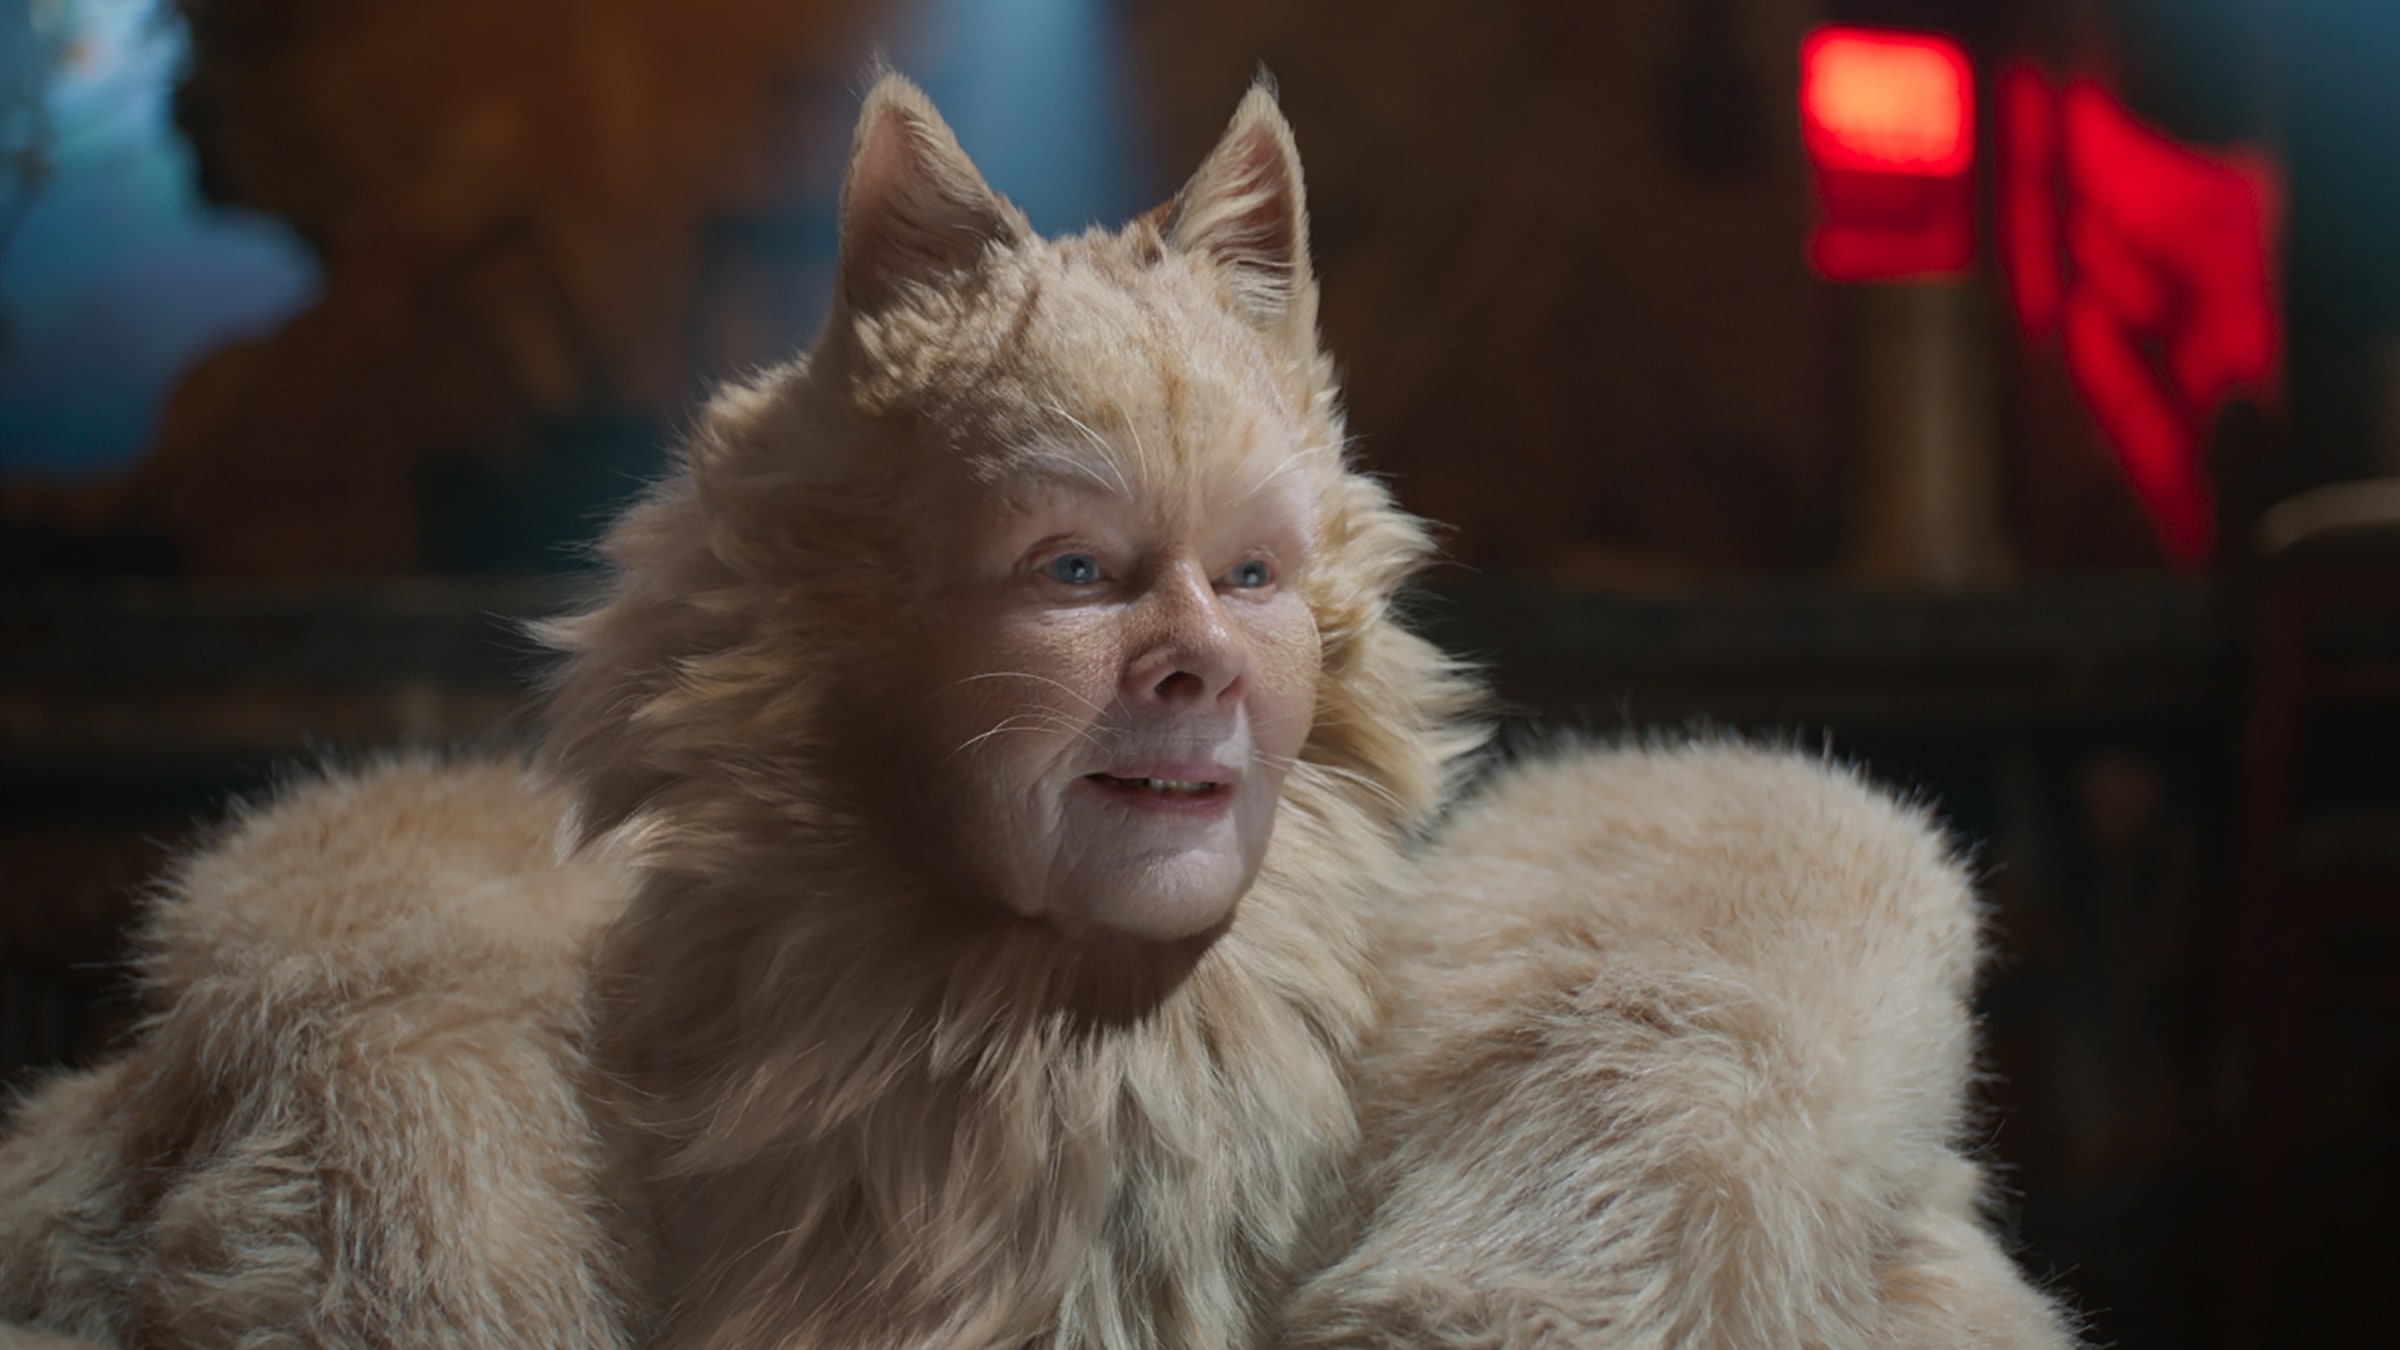 Cats Movie Review Calls It A Boring Disaster Filled With